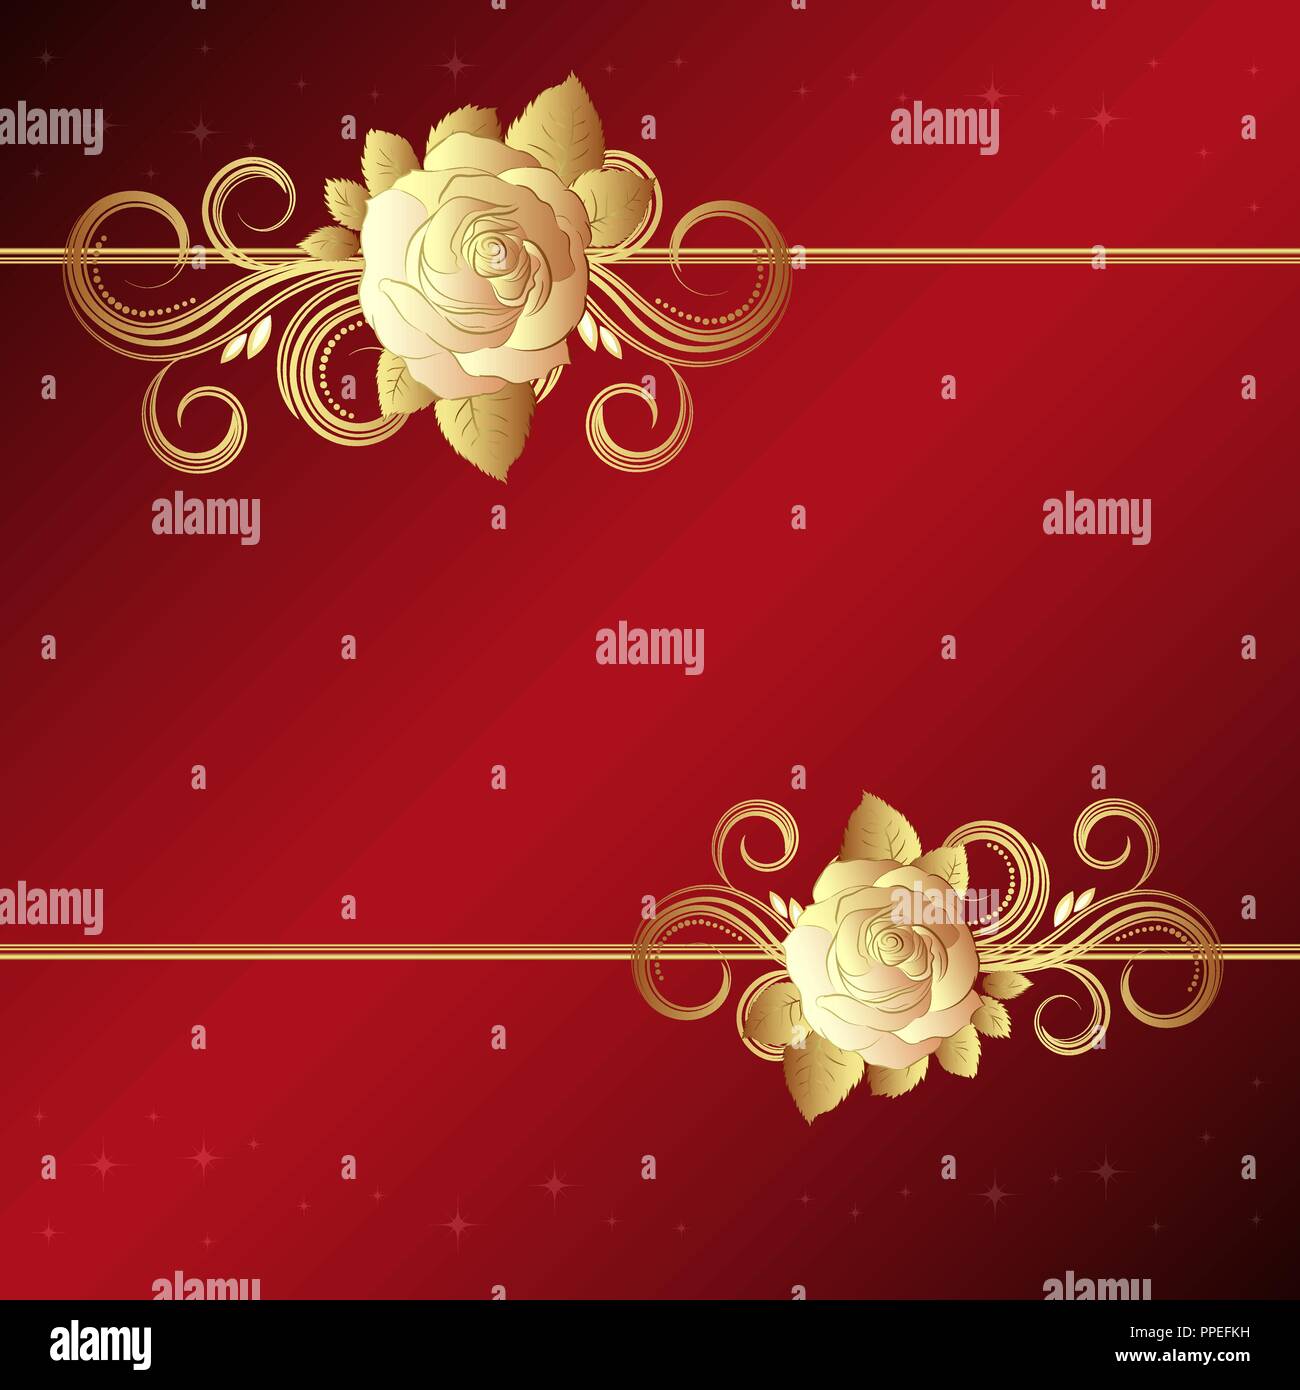 Valentine background with gold roses, vector illustration ...